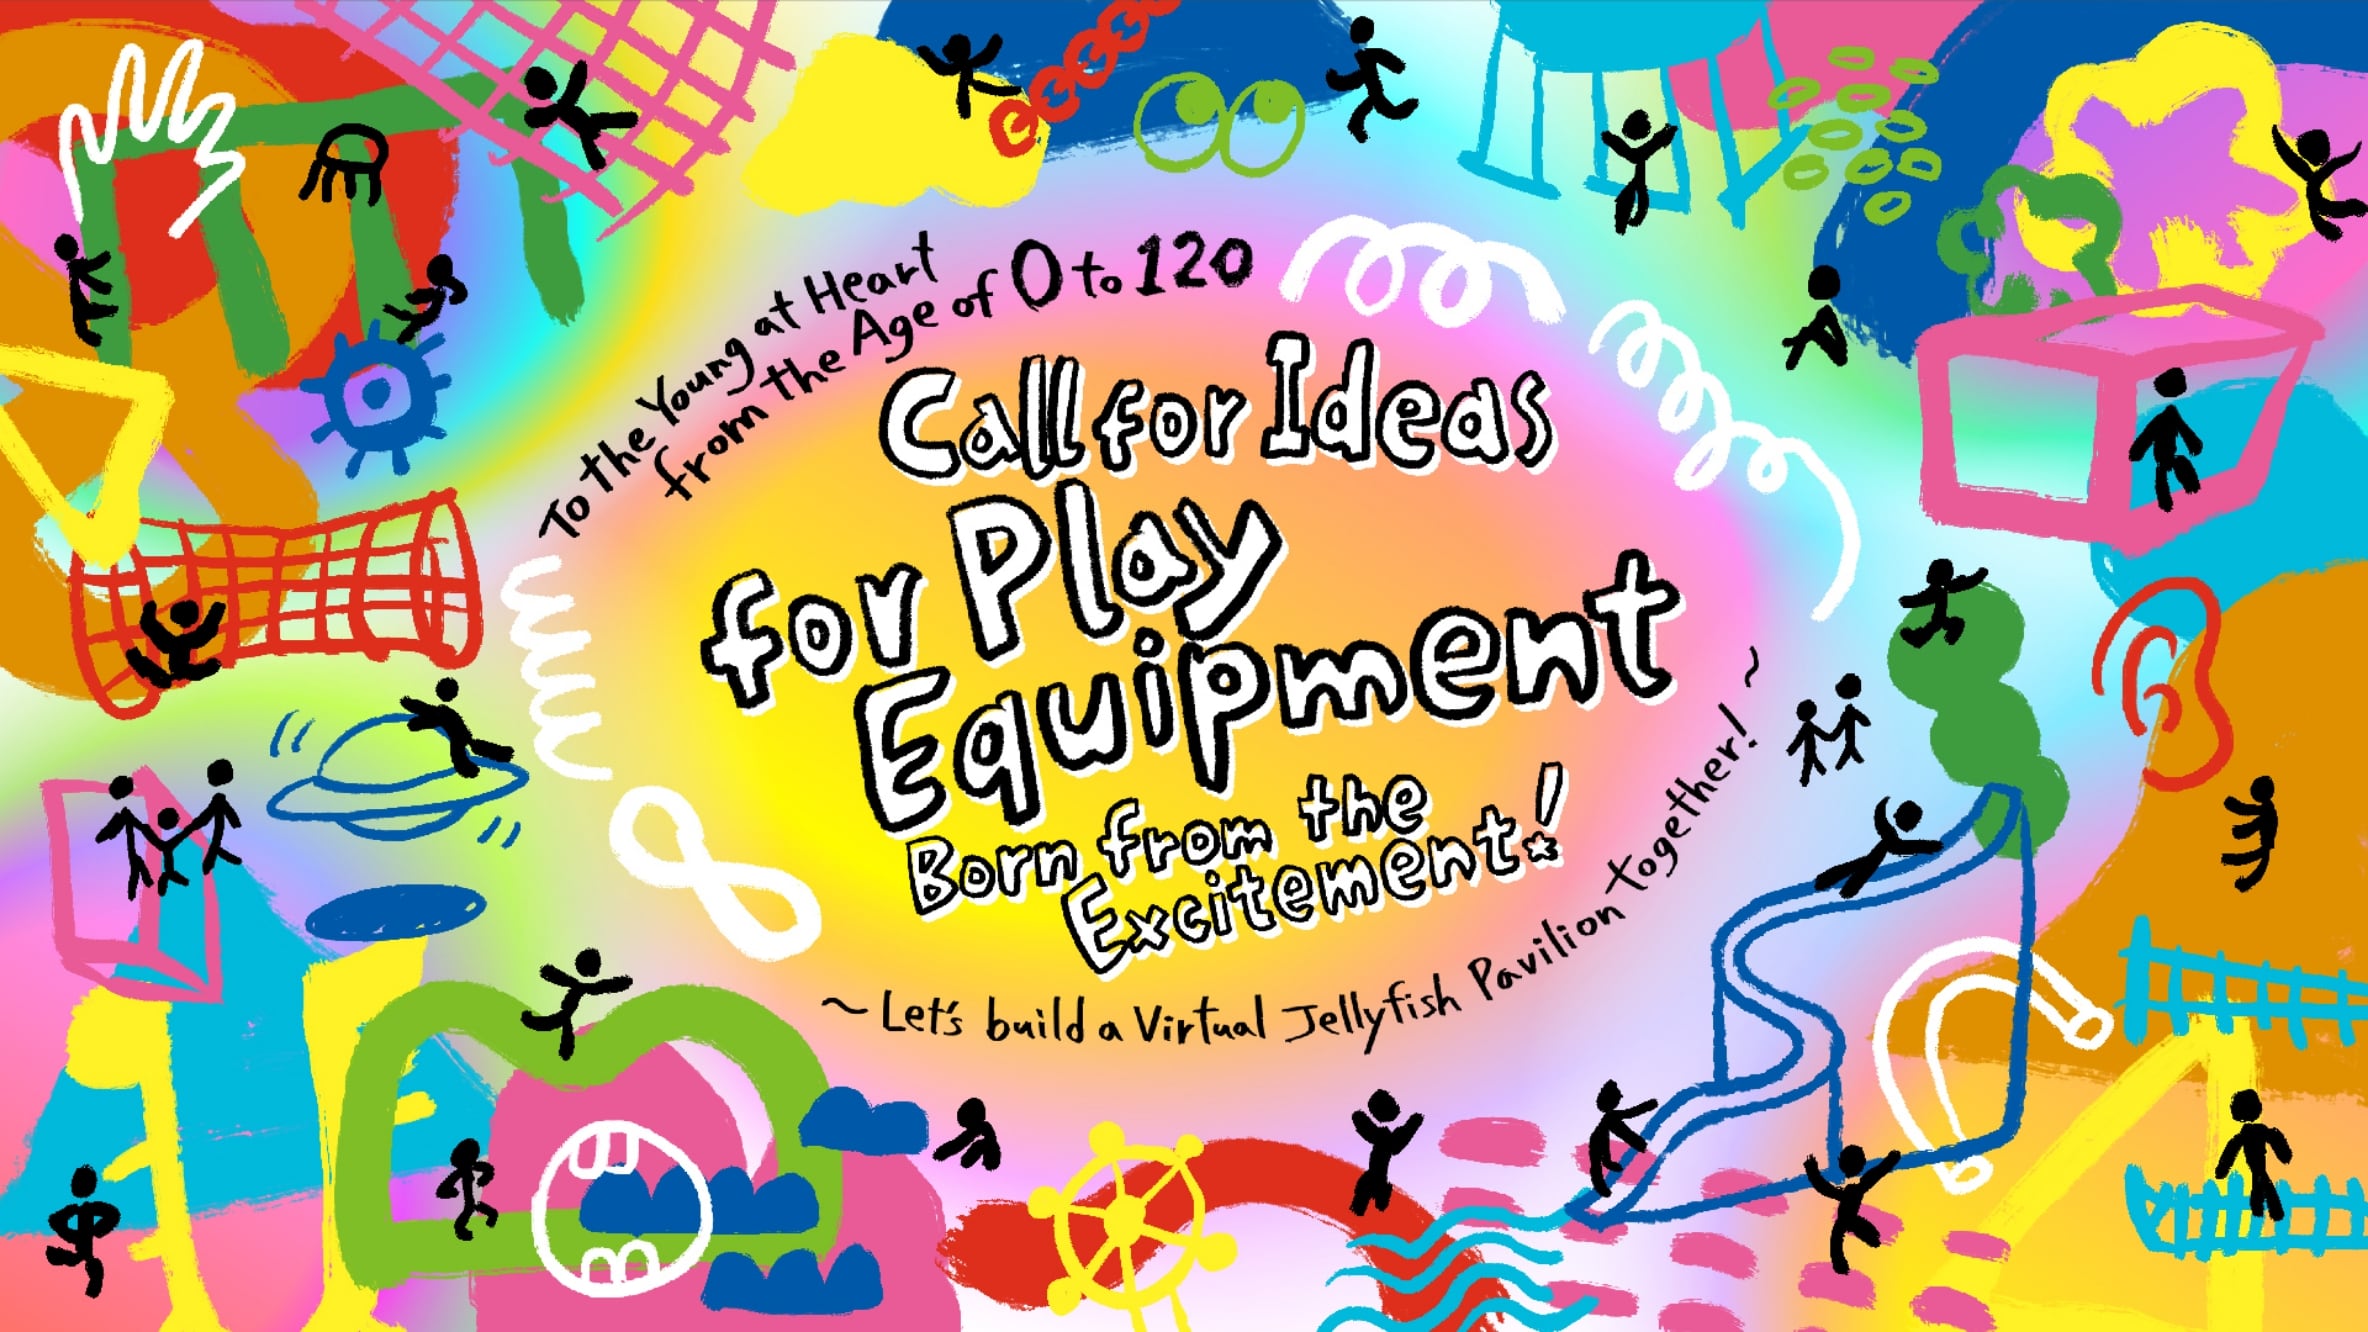 Poster of 'Call for Ideas for Play Equipment Born from the Excitement of Children Ages 0 to 120'